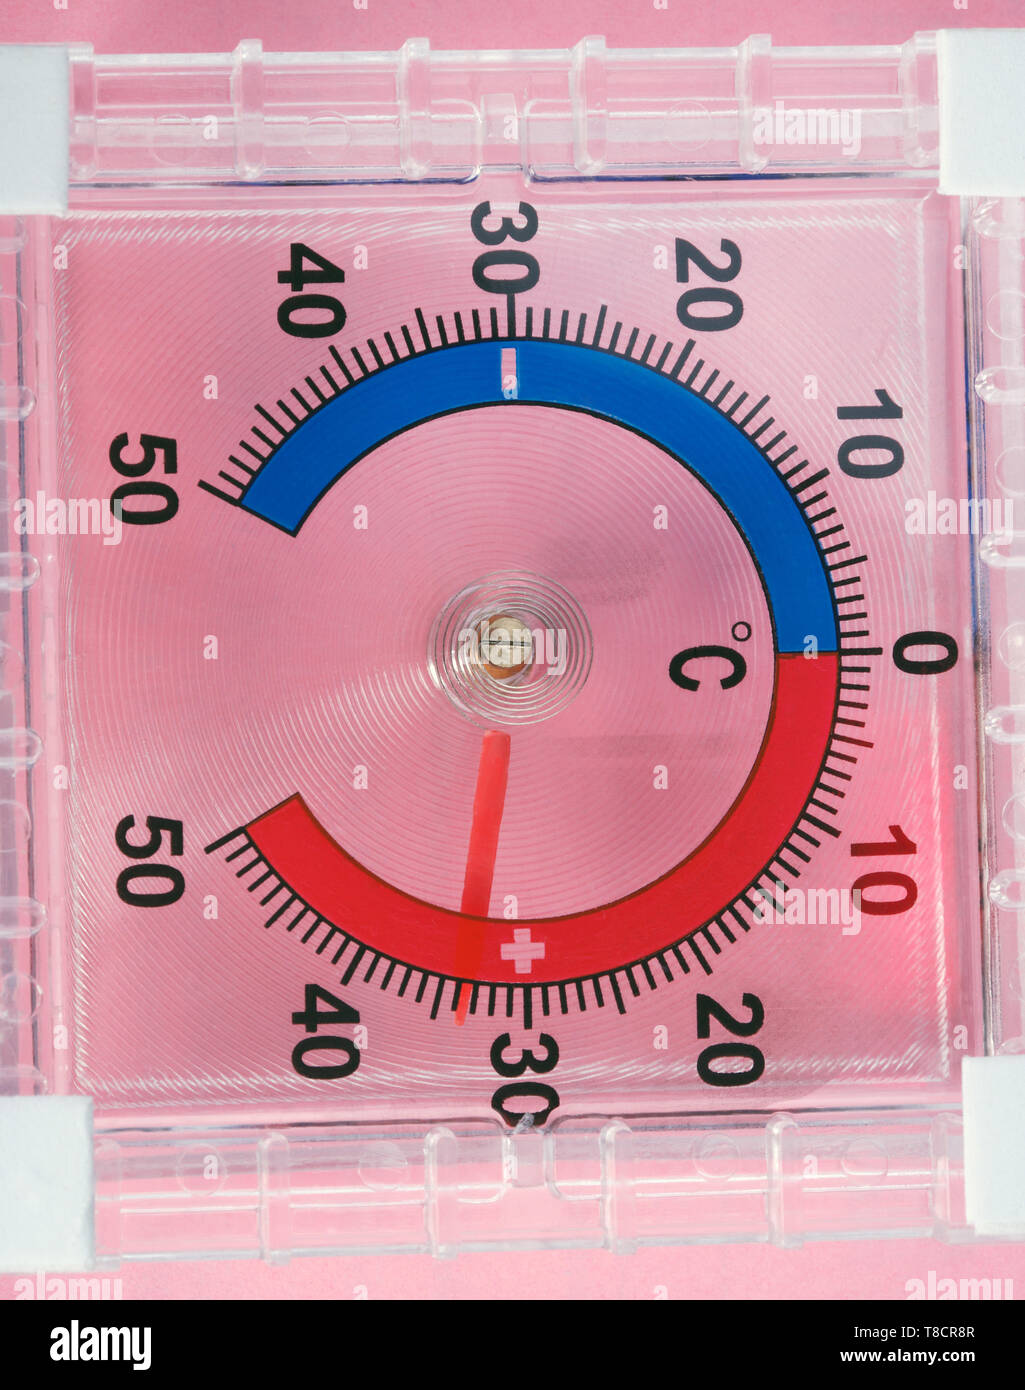 https://c8.alamy.com/comp/T8CR8R/outdoor-window-wall-thermometer-on-pink-background-T8CR8R.jpg